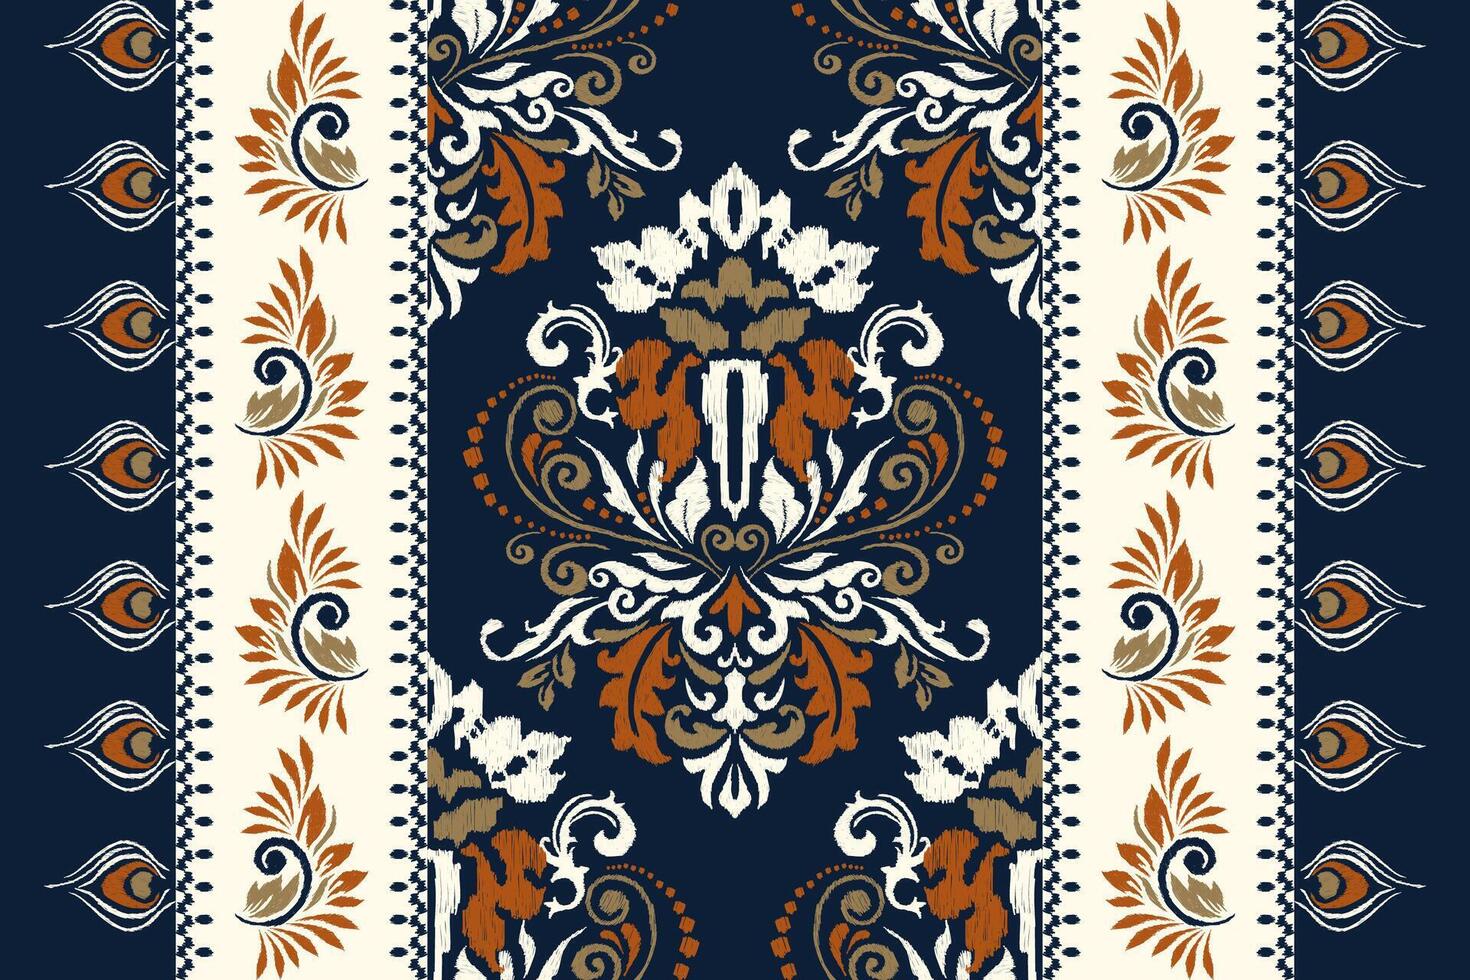 Damask Ikat floral seamless pattern on navy bluebackground vector illustration.Ikat ethnic oriental embroidery,Aztec style,abstract background.design for texture,fabric,clothing,wrapping,decoration.